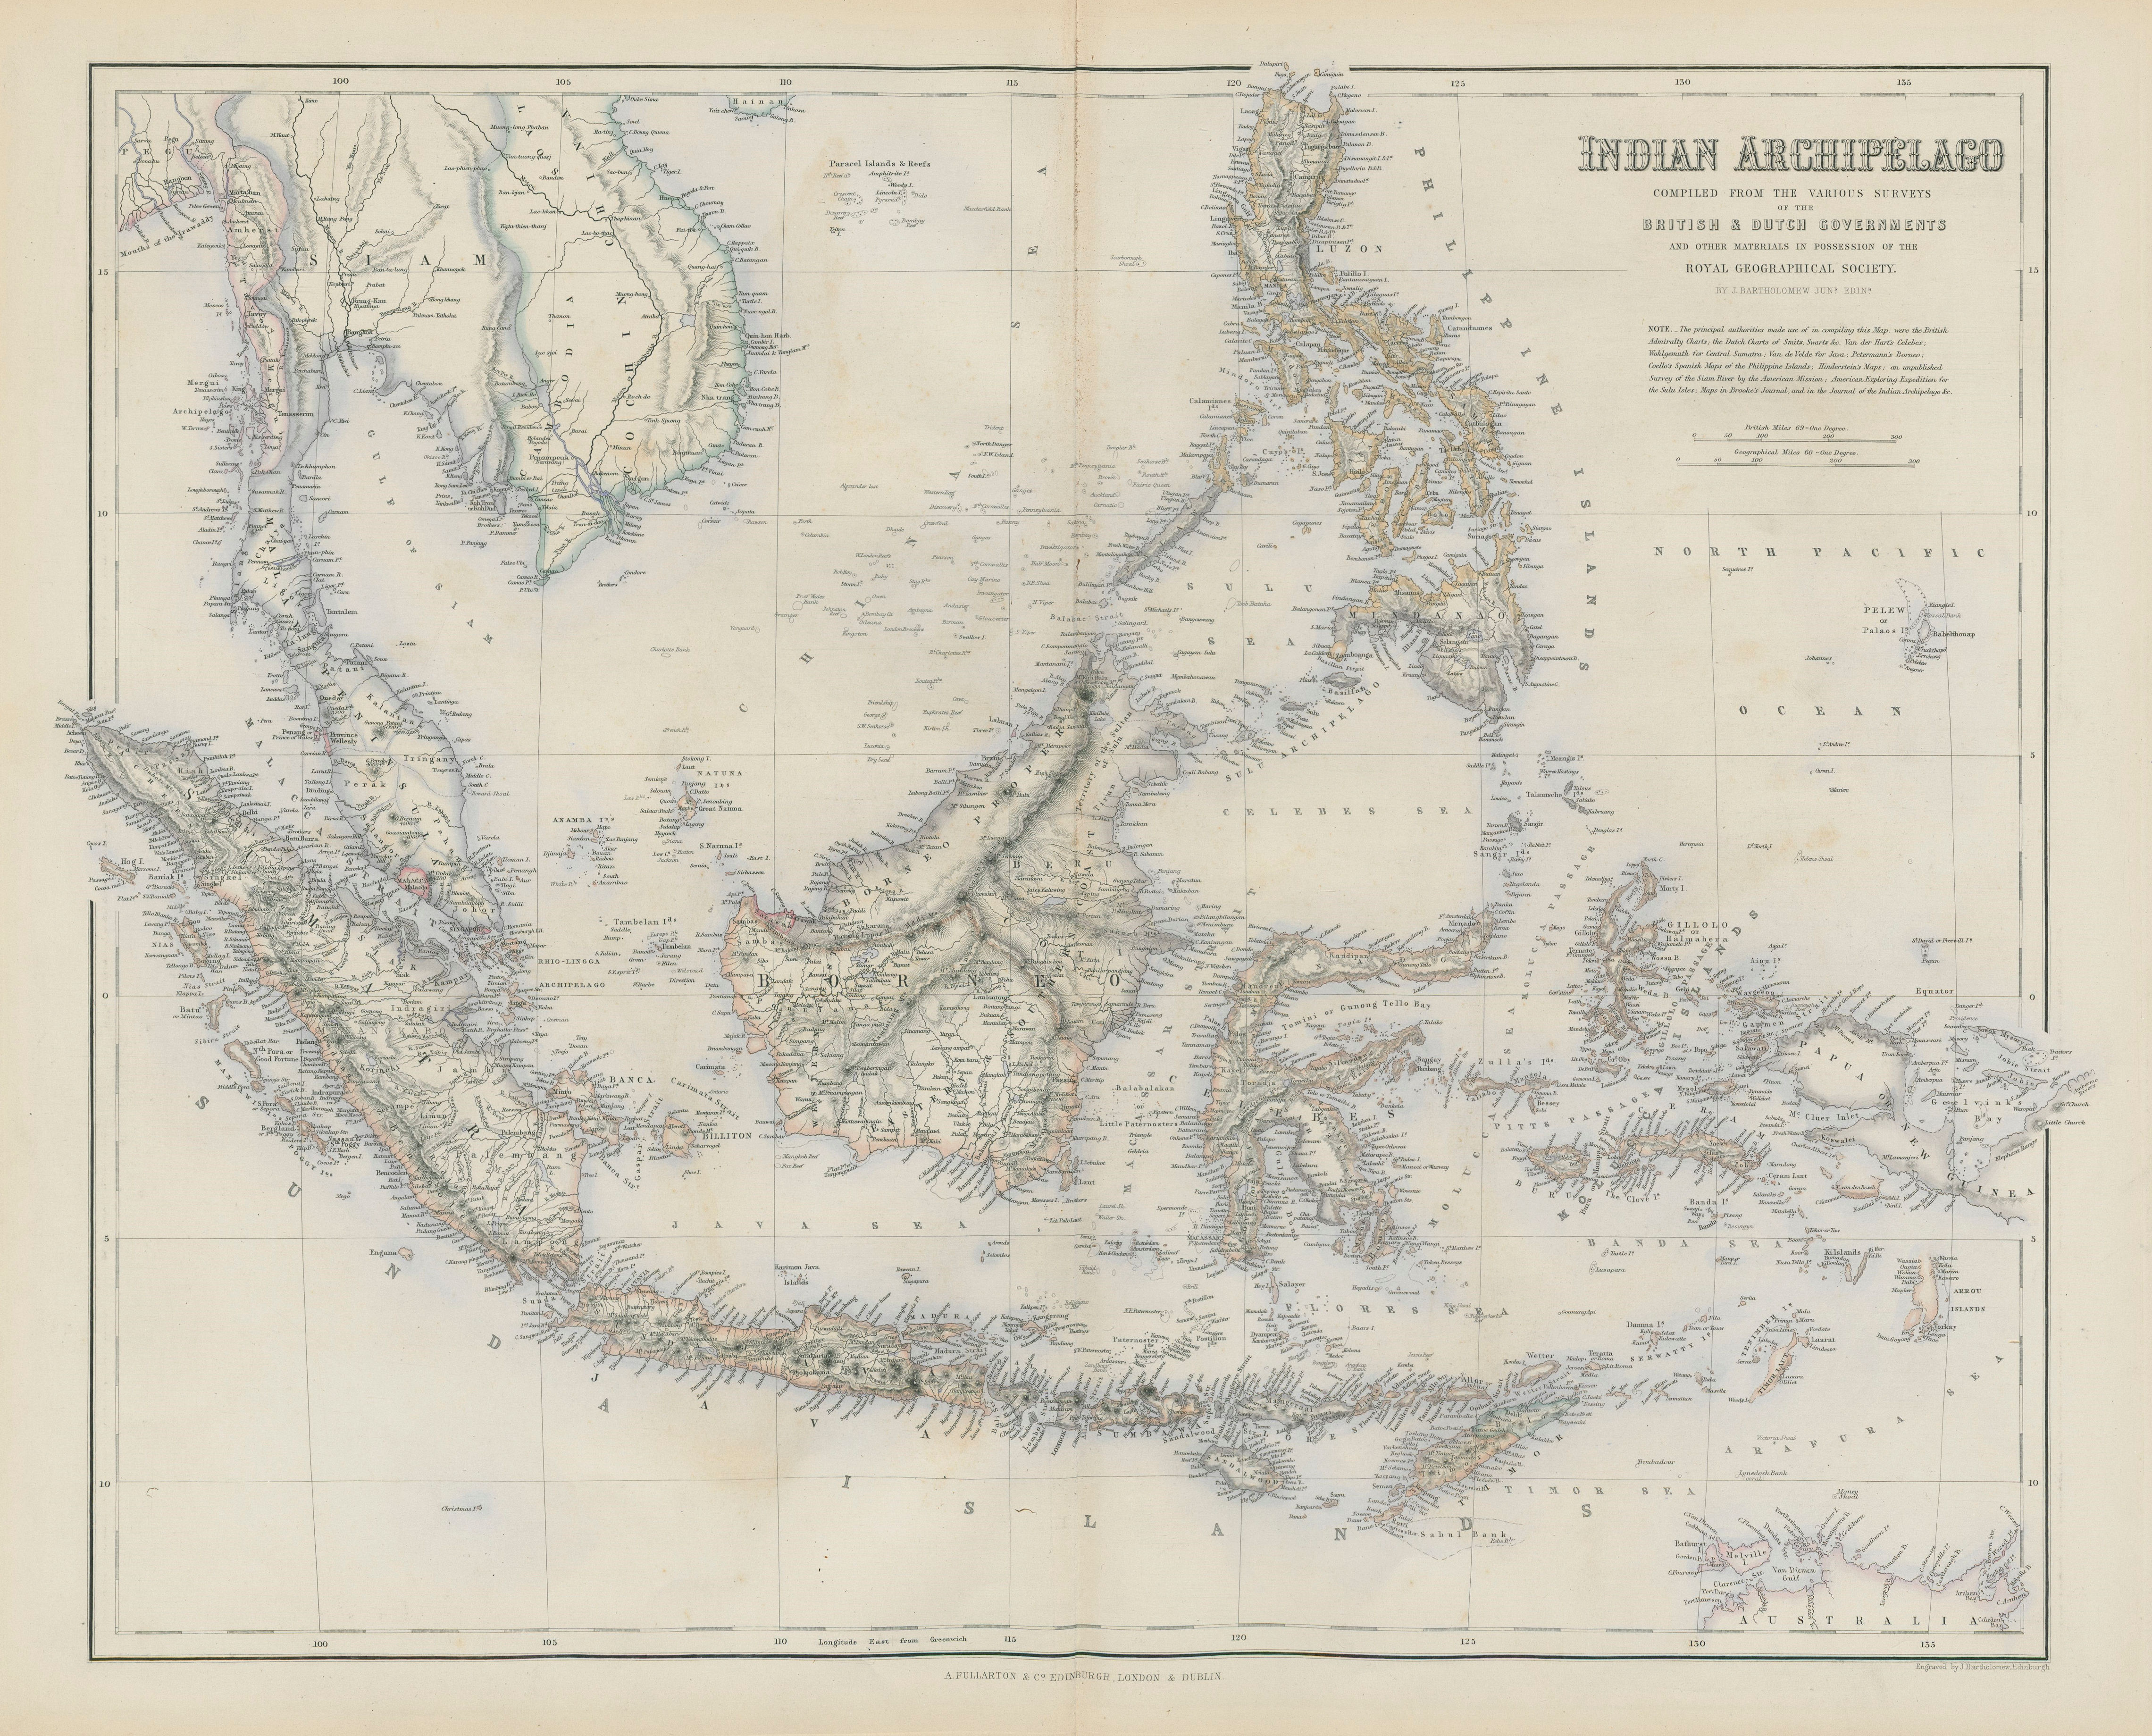 Associate Product Indian Archipelago. East Indies Indonesia Philippines Malaysia SWANSTON 1860 map